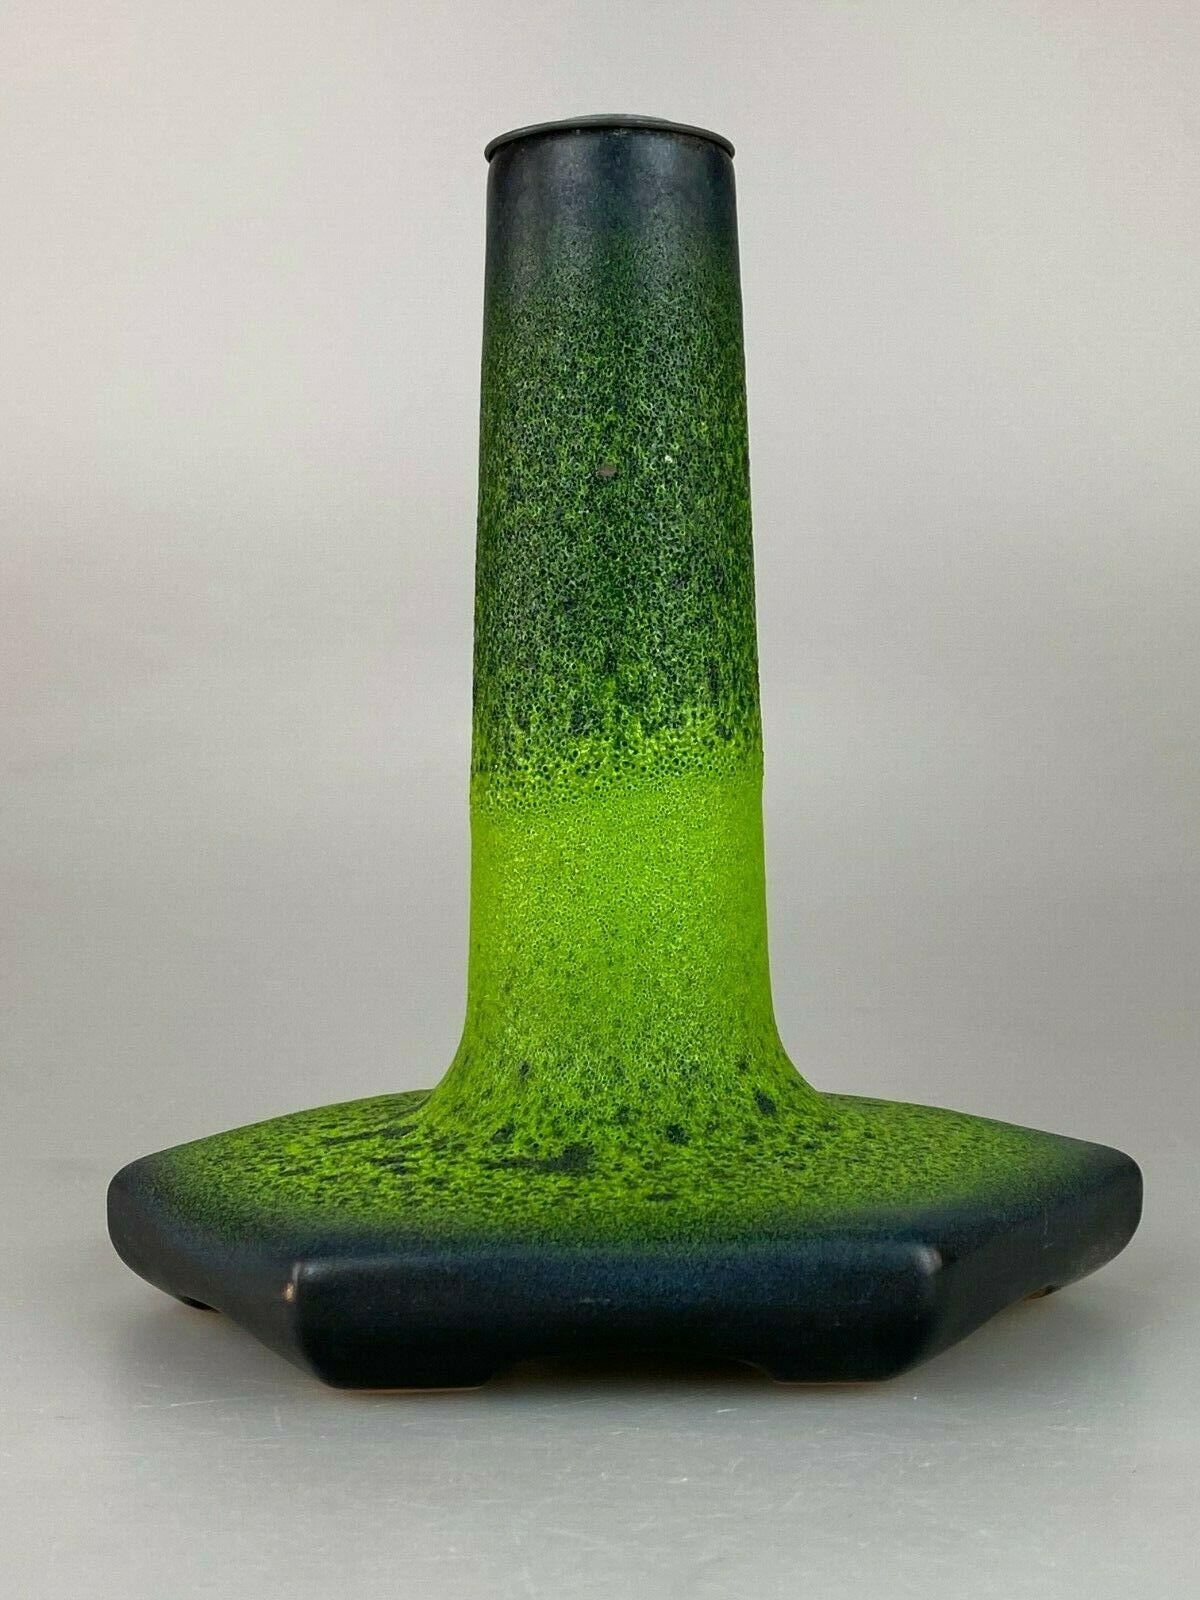 60s 70s Lamp Light Wall Lamp Ceramic Mid Century Space Age 60s 70s

Object: wall lamp

Manufacturer:

Condition: good

Age: around 1960-1970

Dimensions:

Diameter = 18.5cm
Height = 20cm

Other notes:

The pictures serve as part of